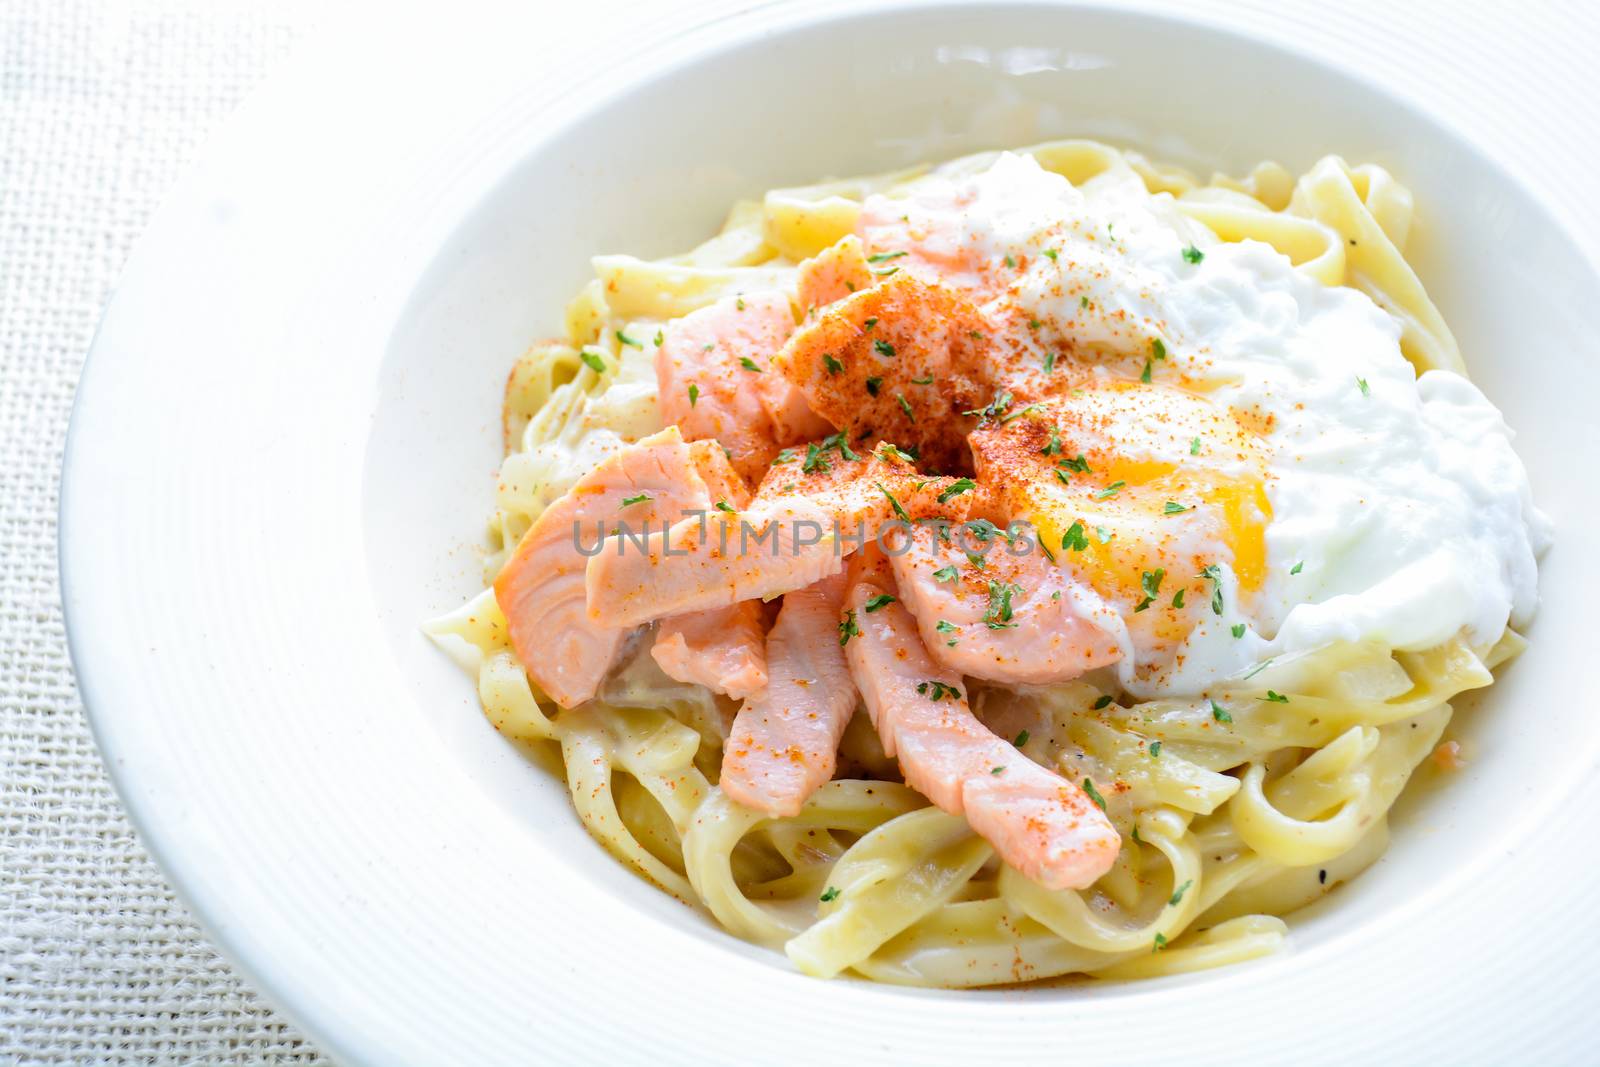 Fettucine with salmon, egg and parmesan cheese, served on white plate.